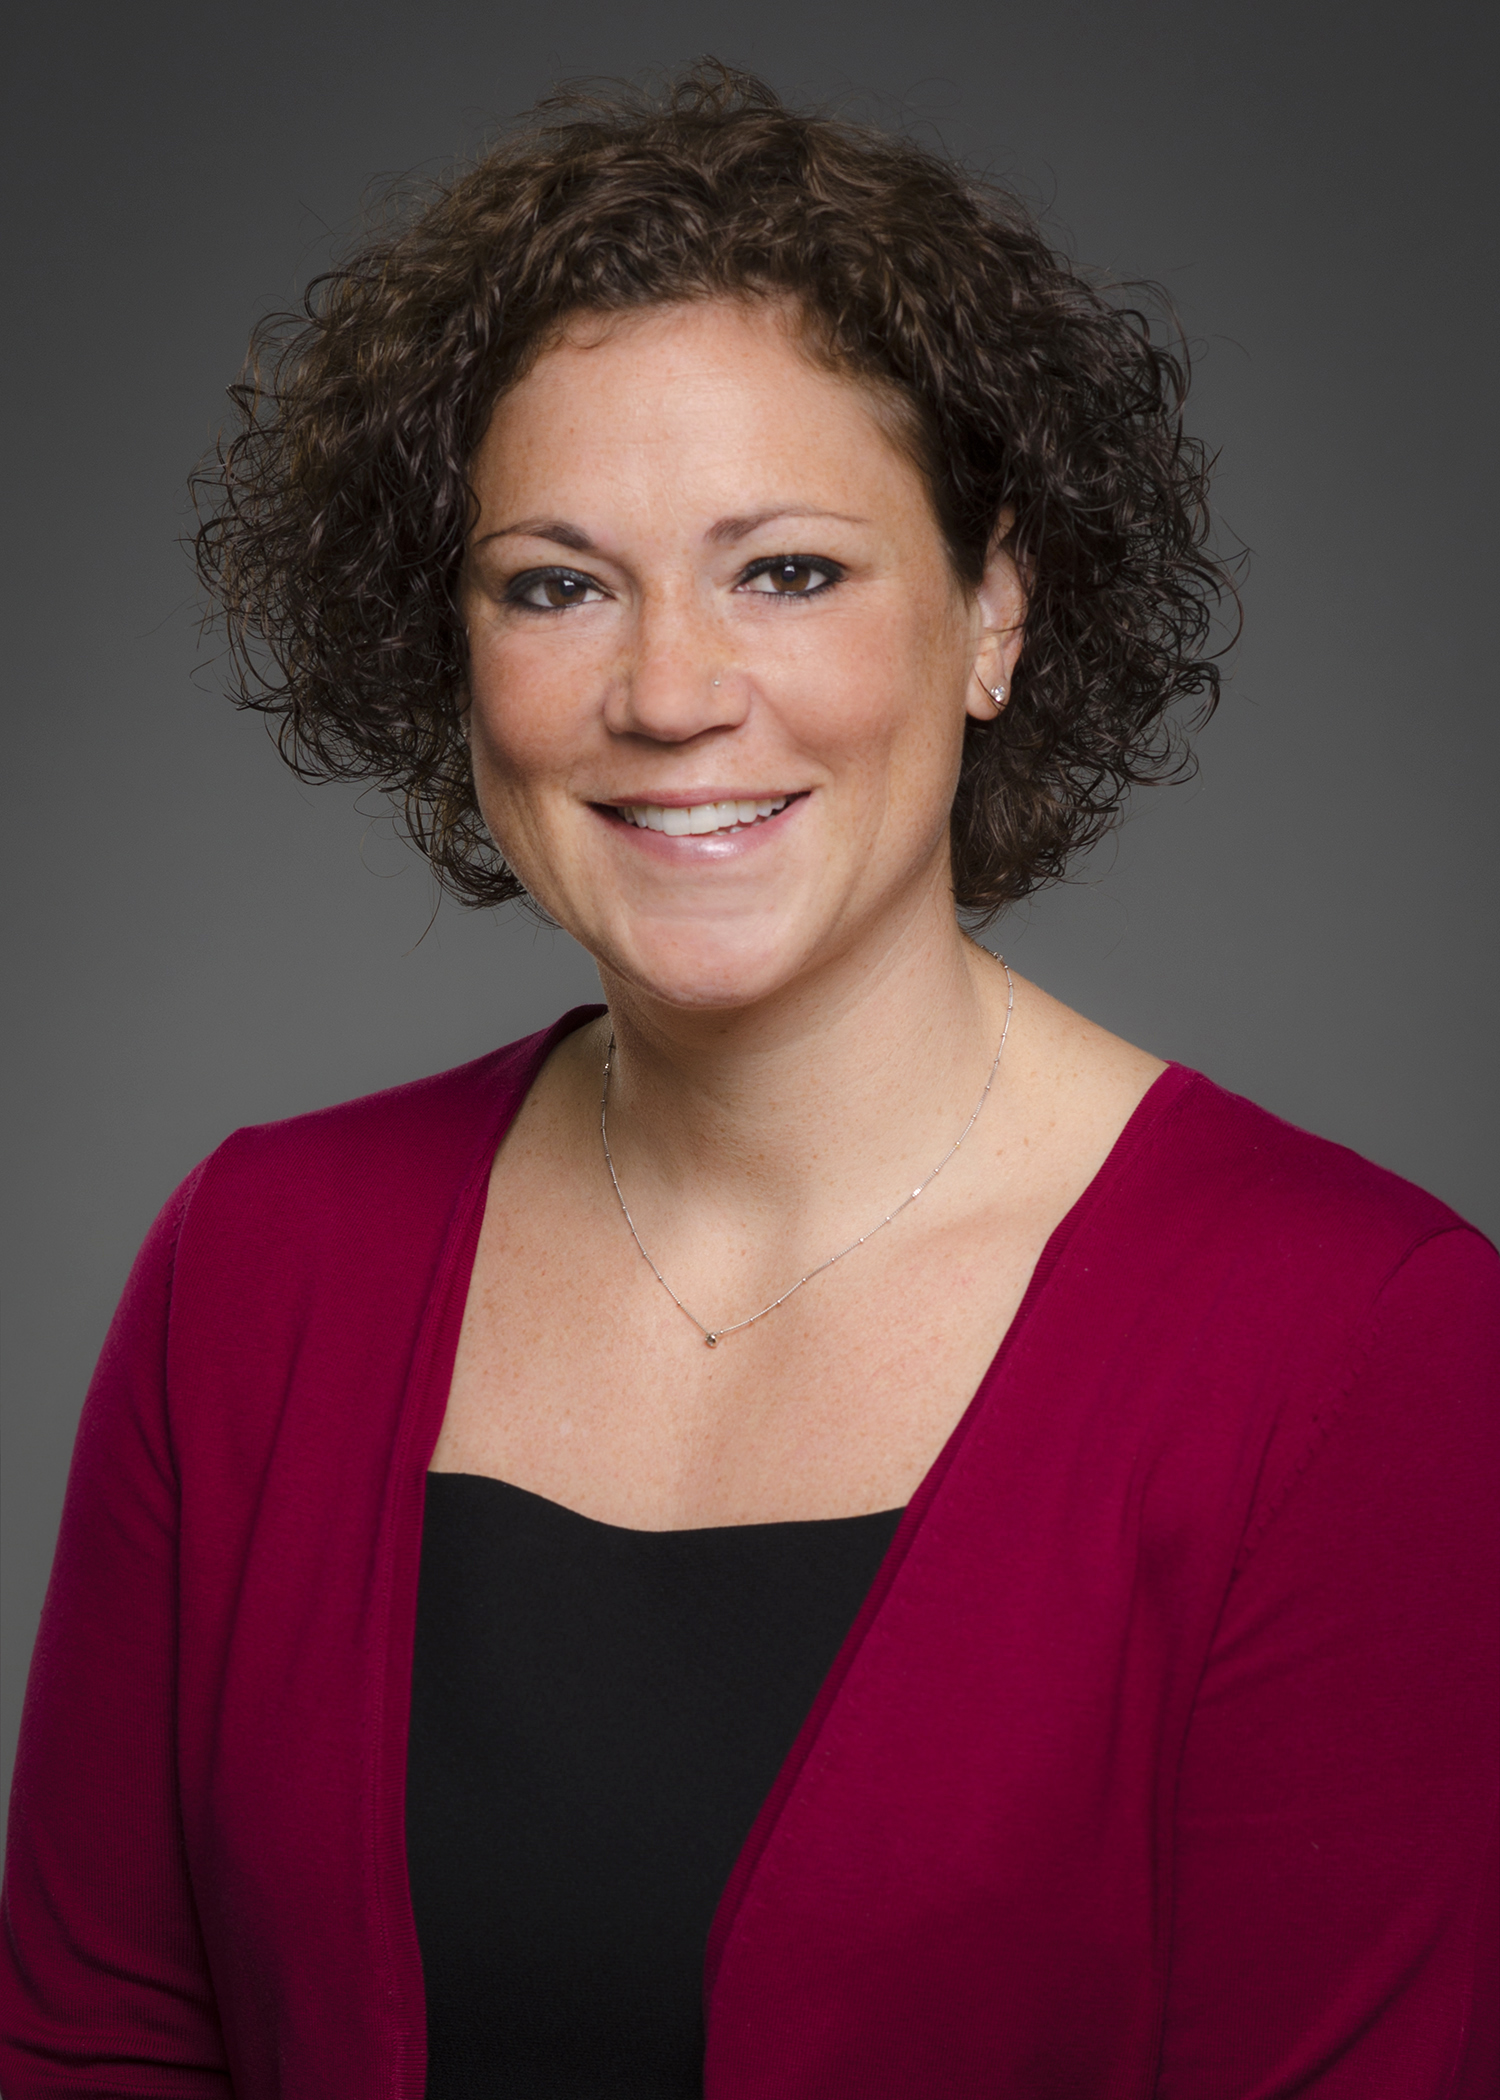 social and emotional learning: Nicole Lovecchio (headshot), chief programming officer at WINGS for Kids, smiling woman with short brown curly hair, earrings, necklace, black top, maroon jacket.